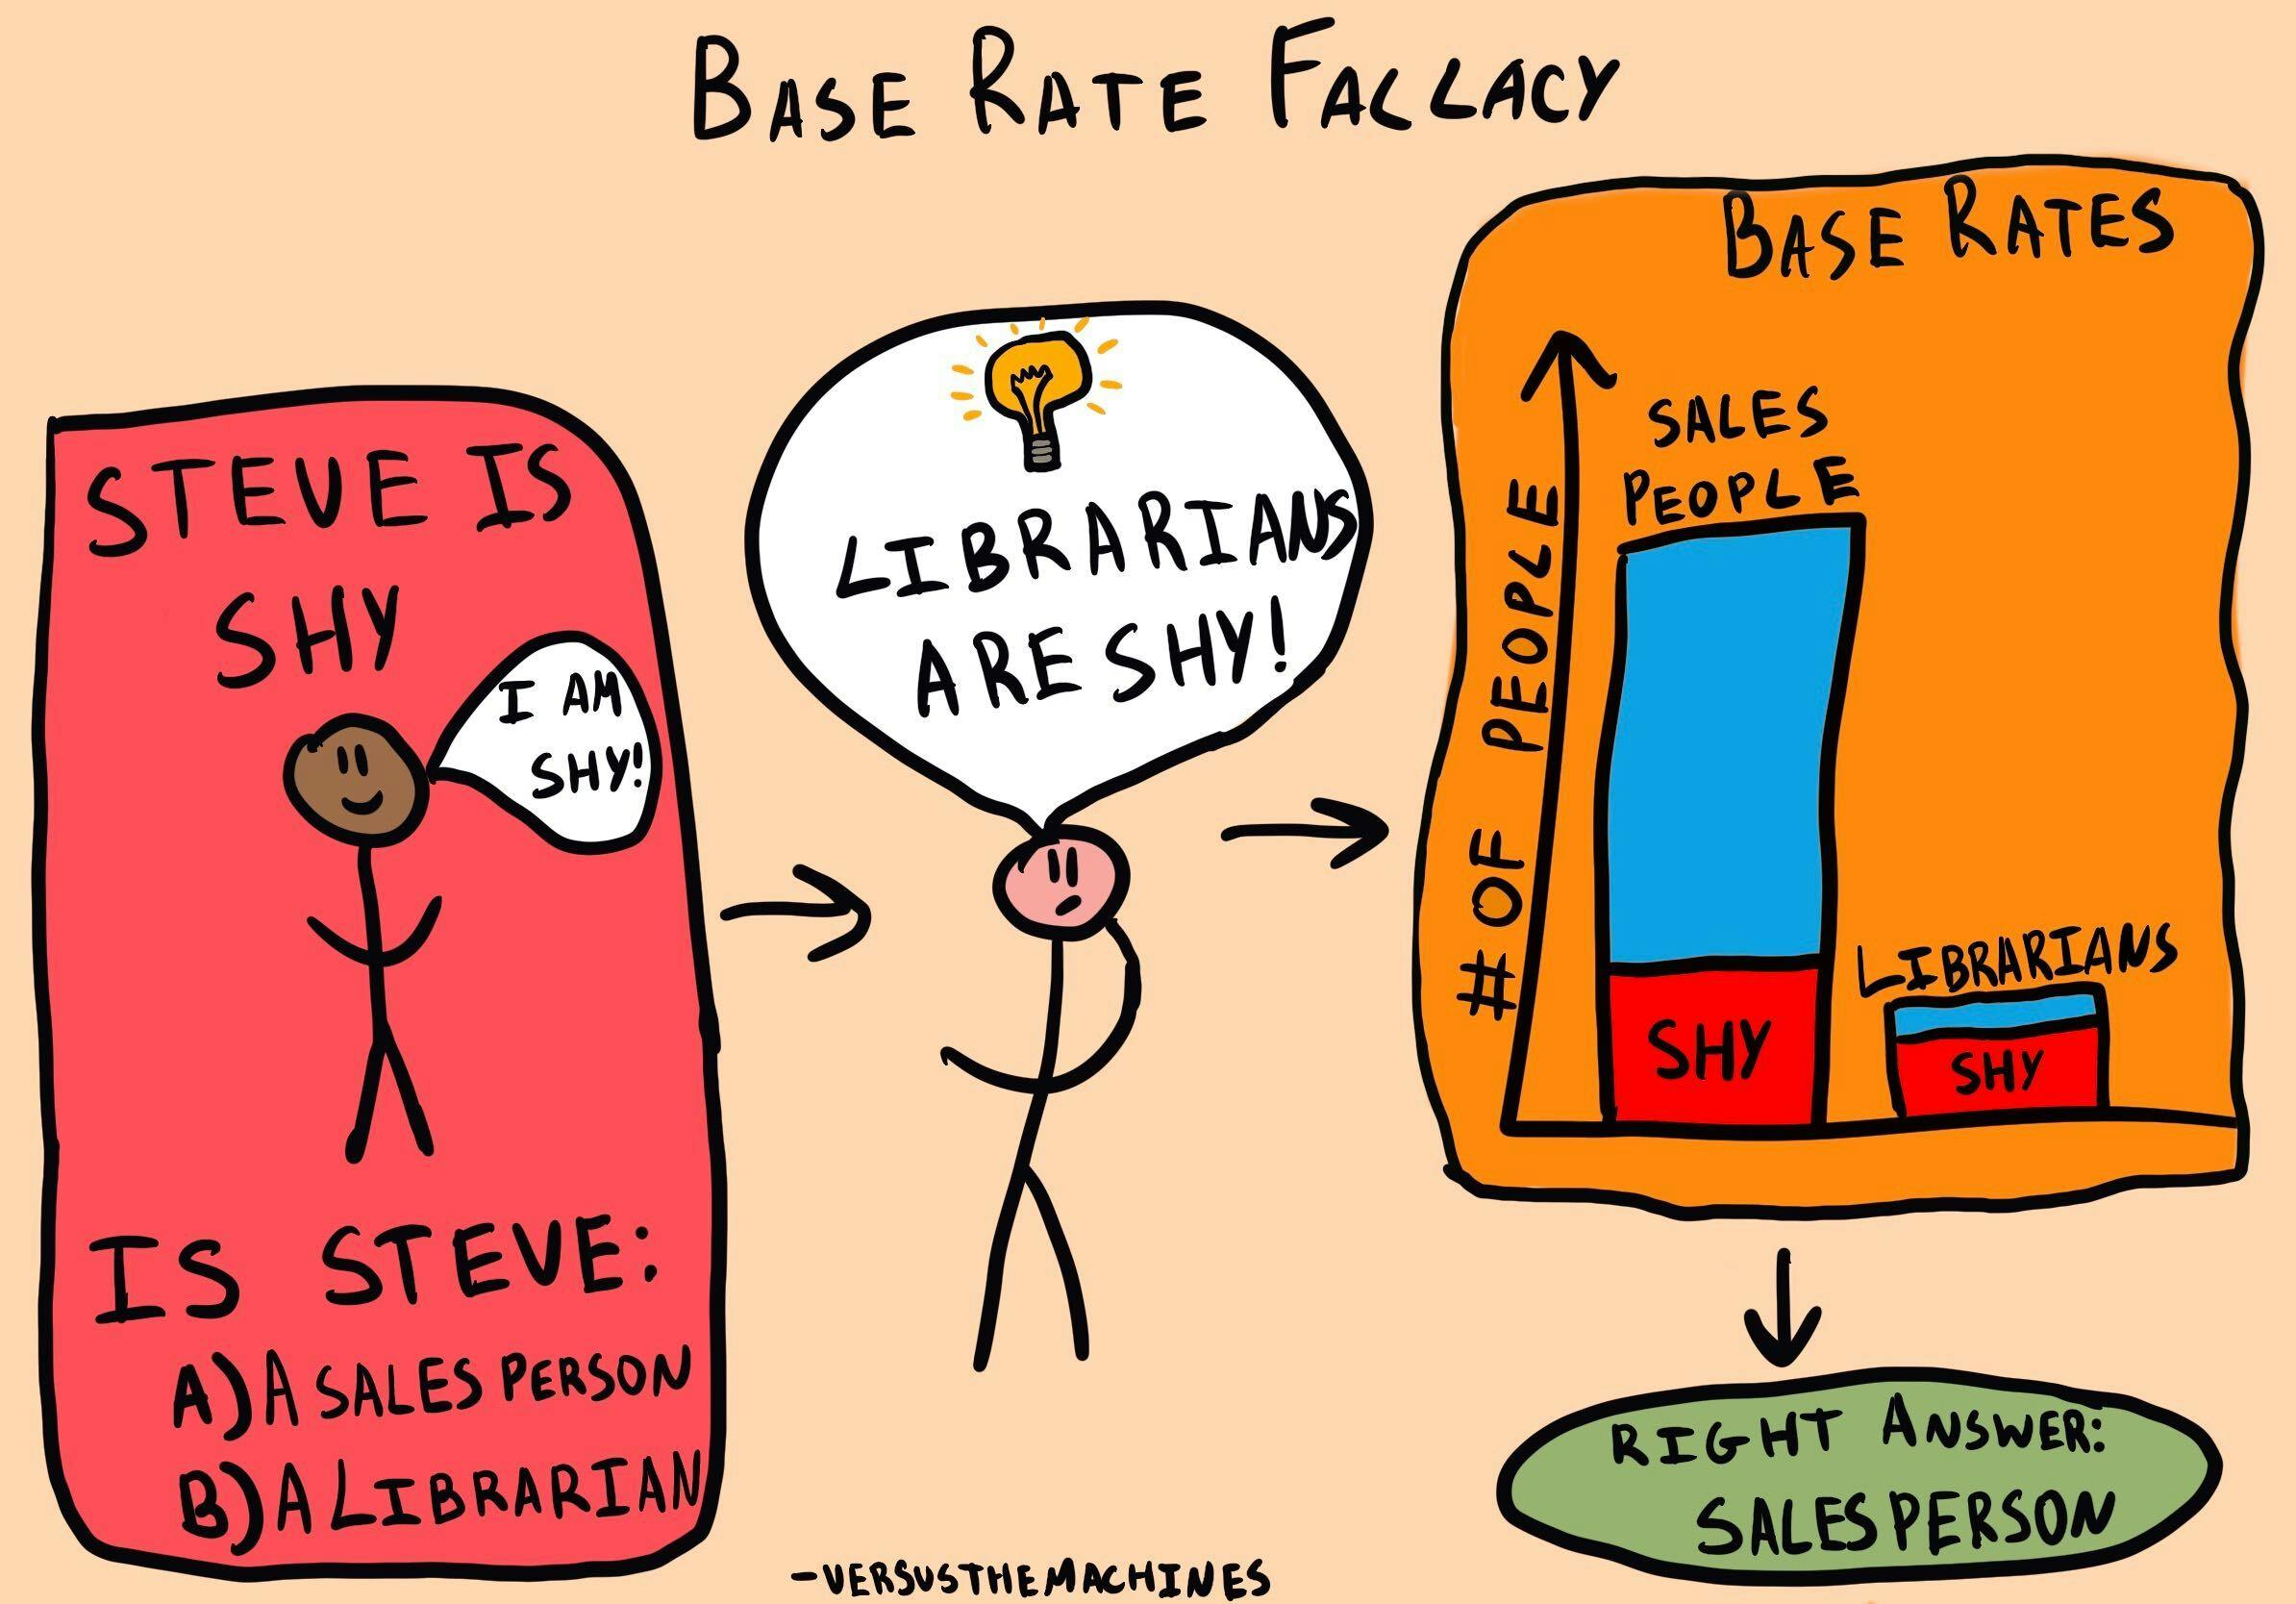 Base rate fallacy illustration